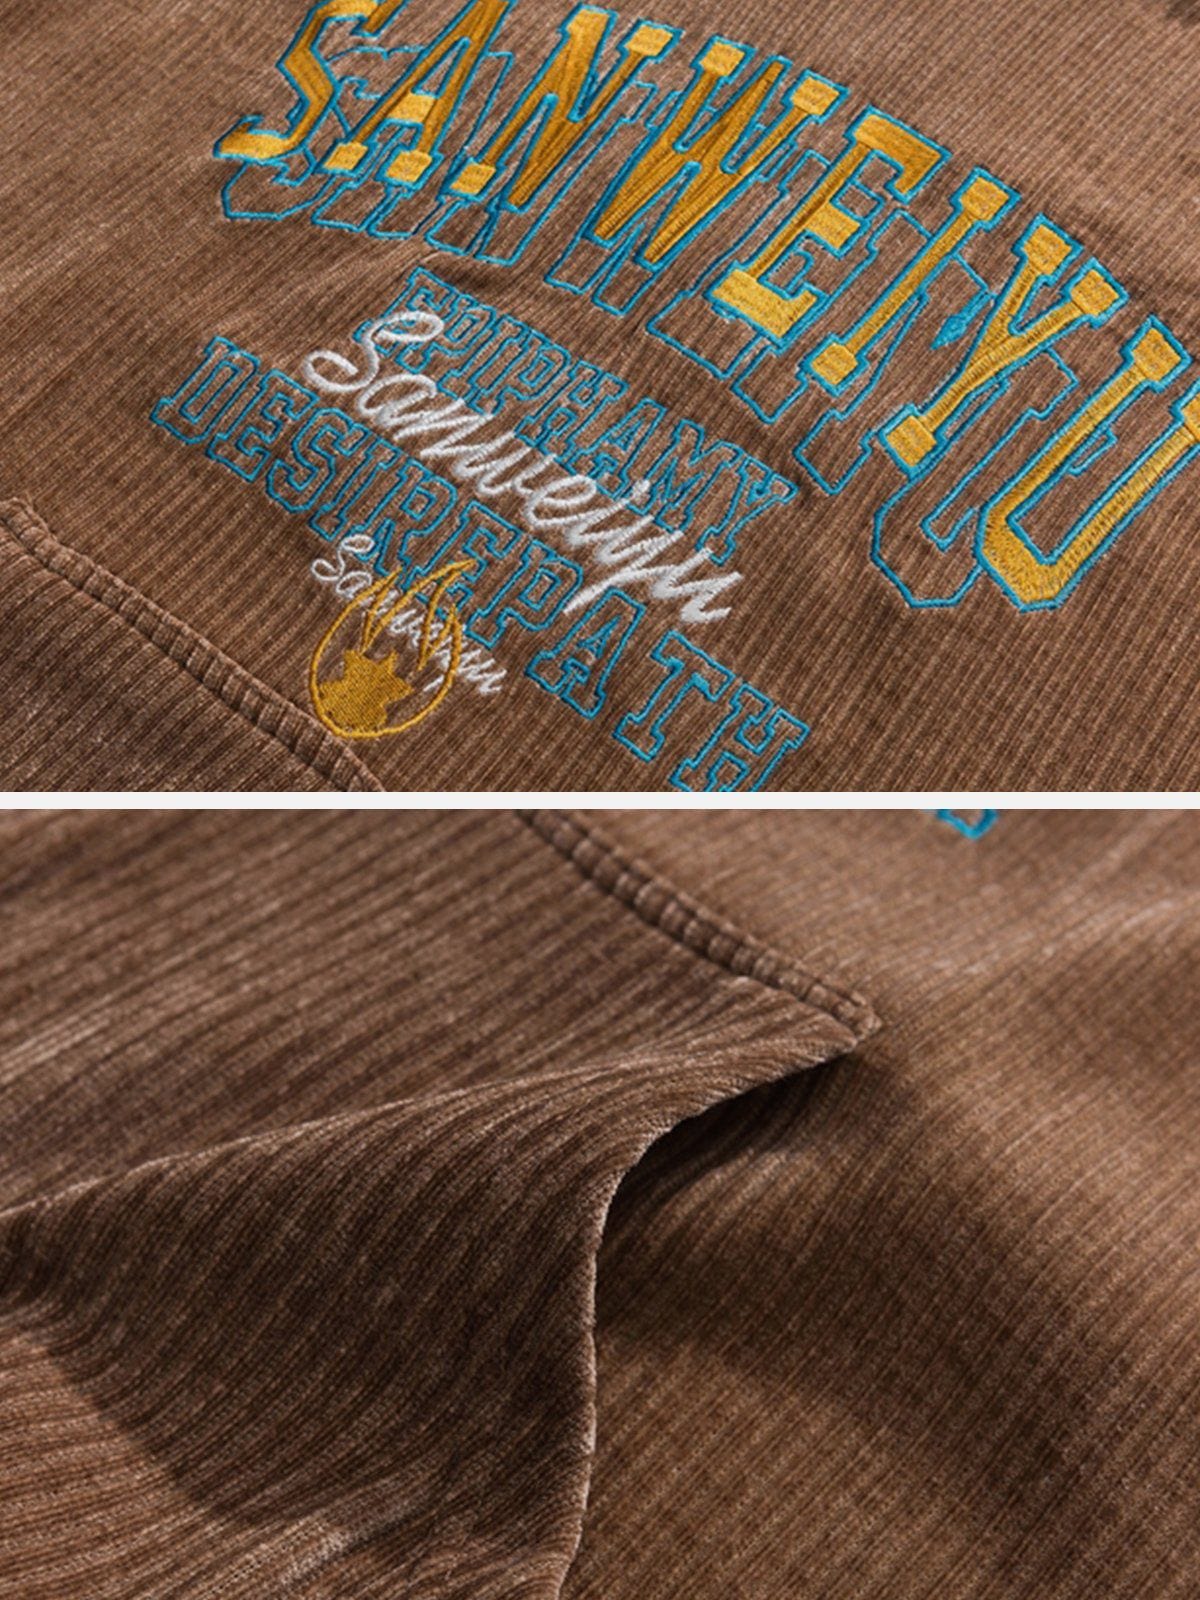 Embroidered Letters Corduroy Hoodie